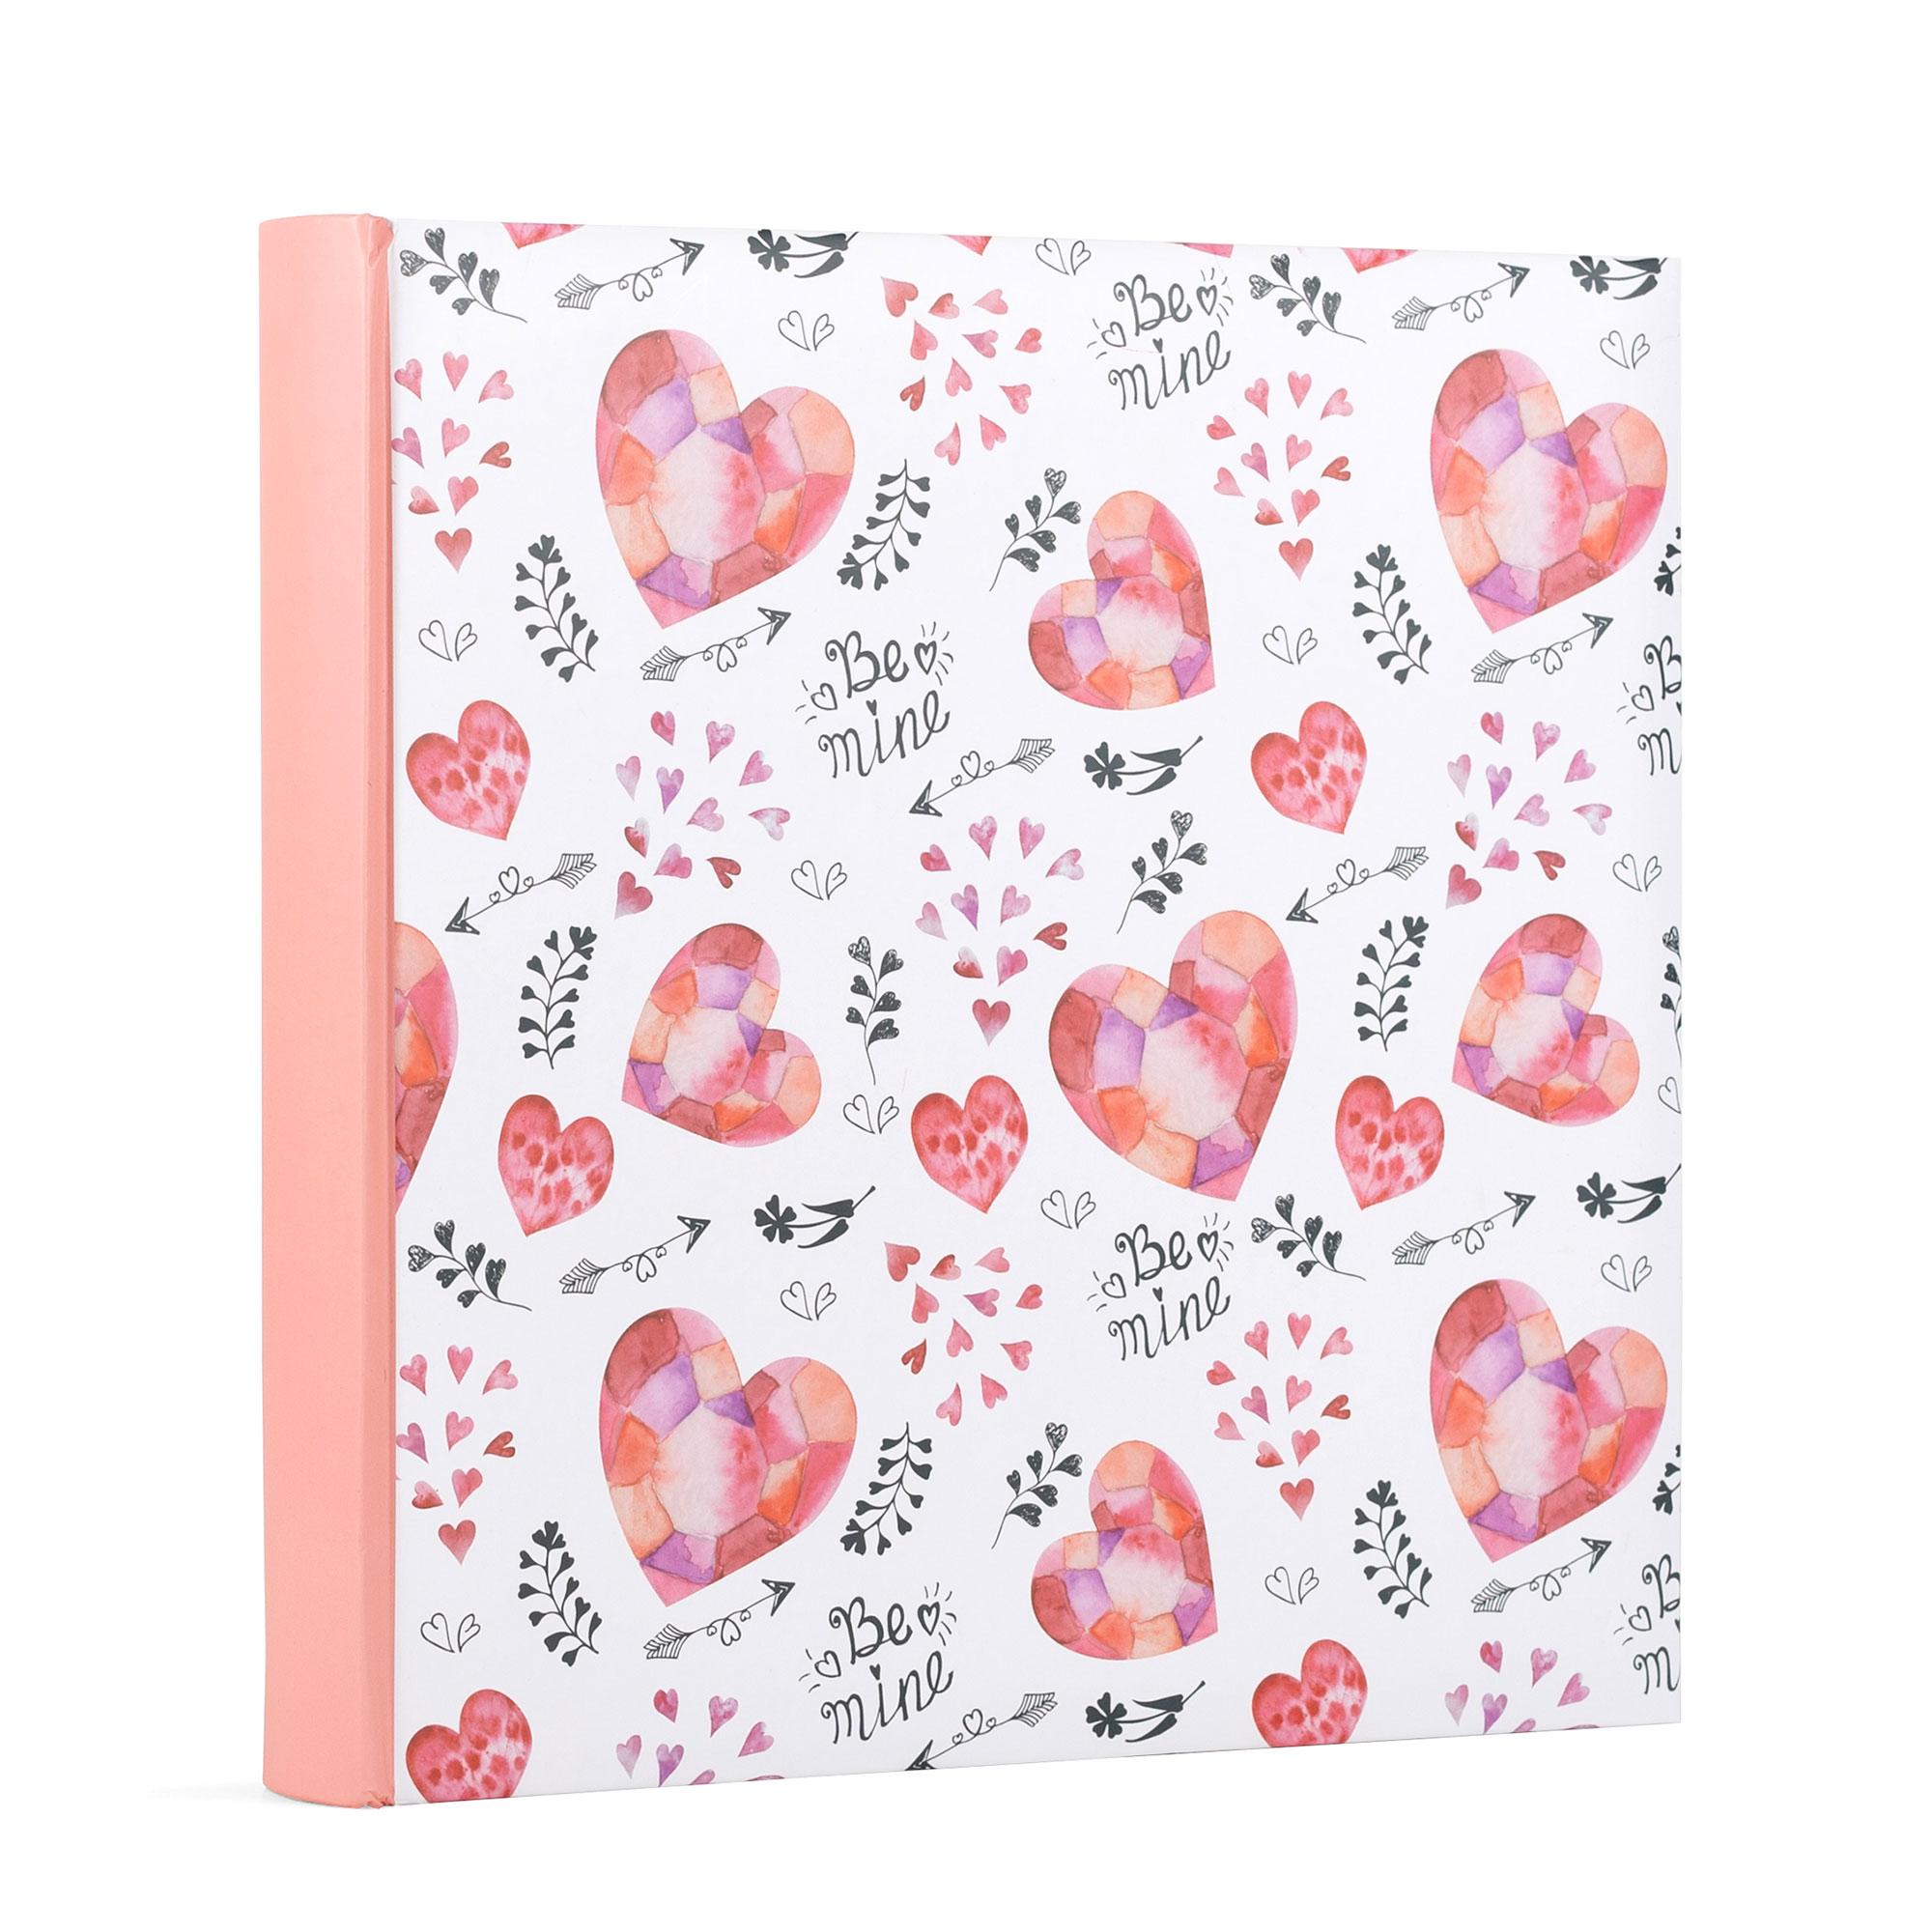 Be Mine Interleaved Photoboard Album covered in Hearts